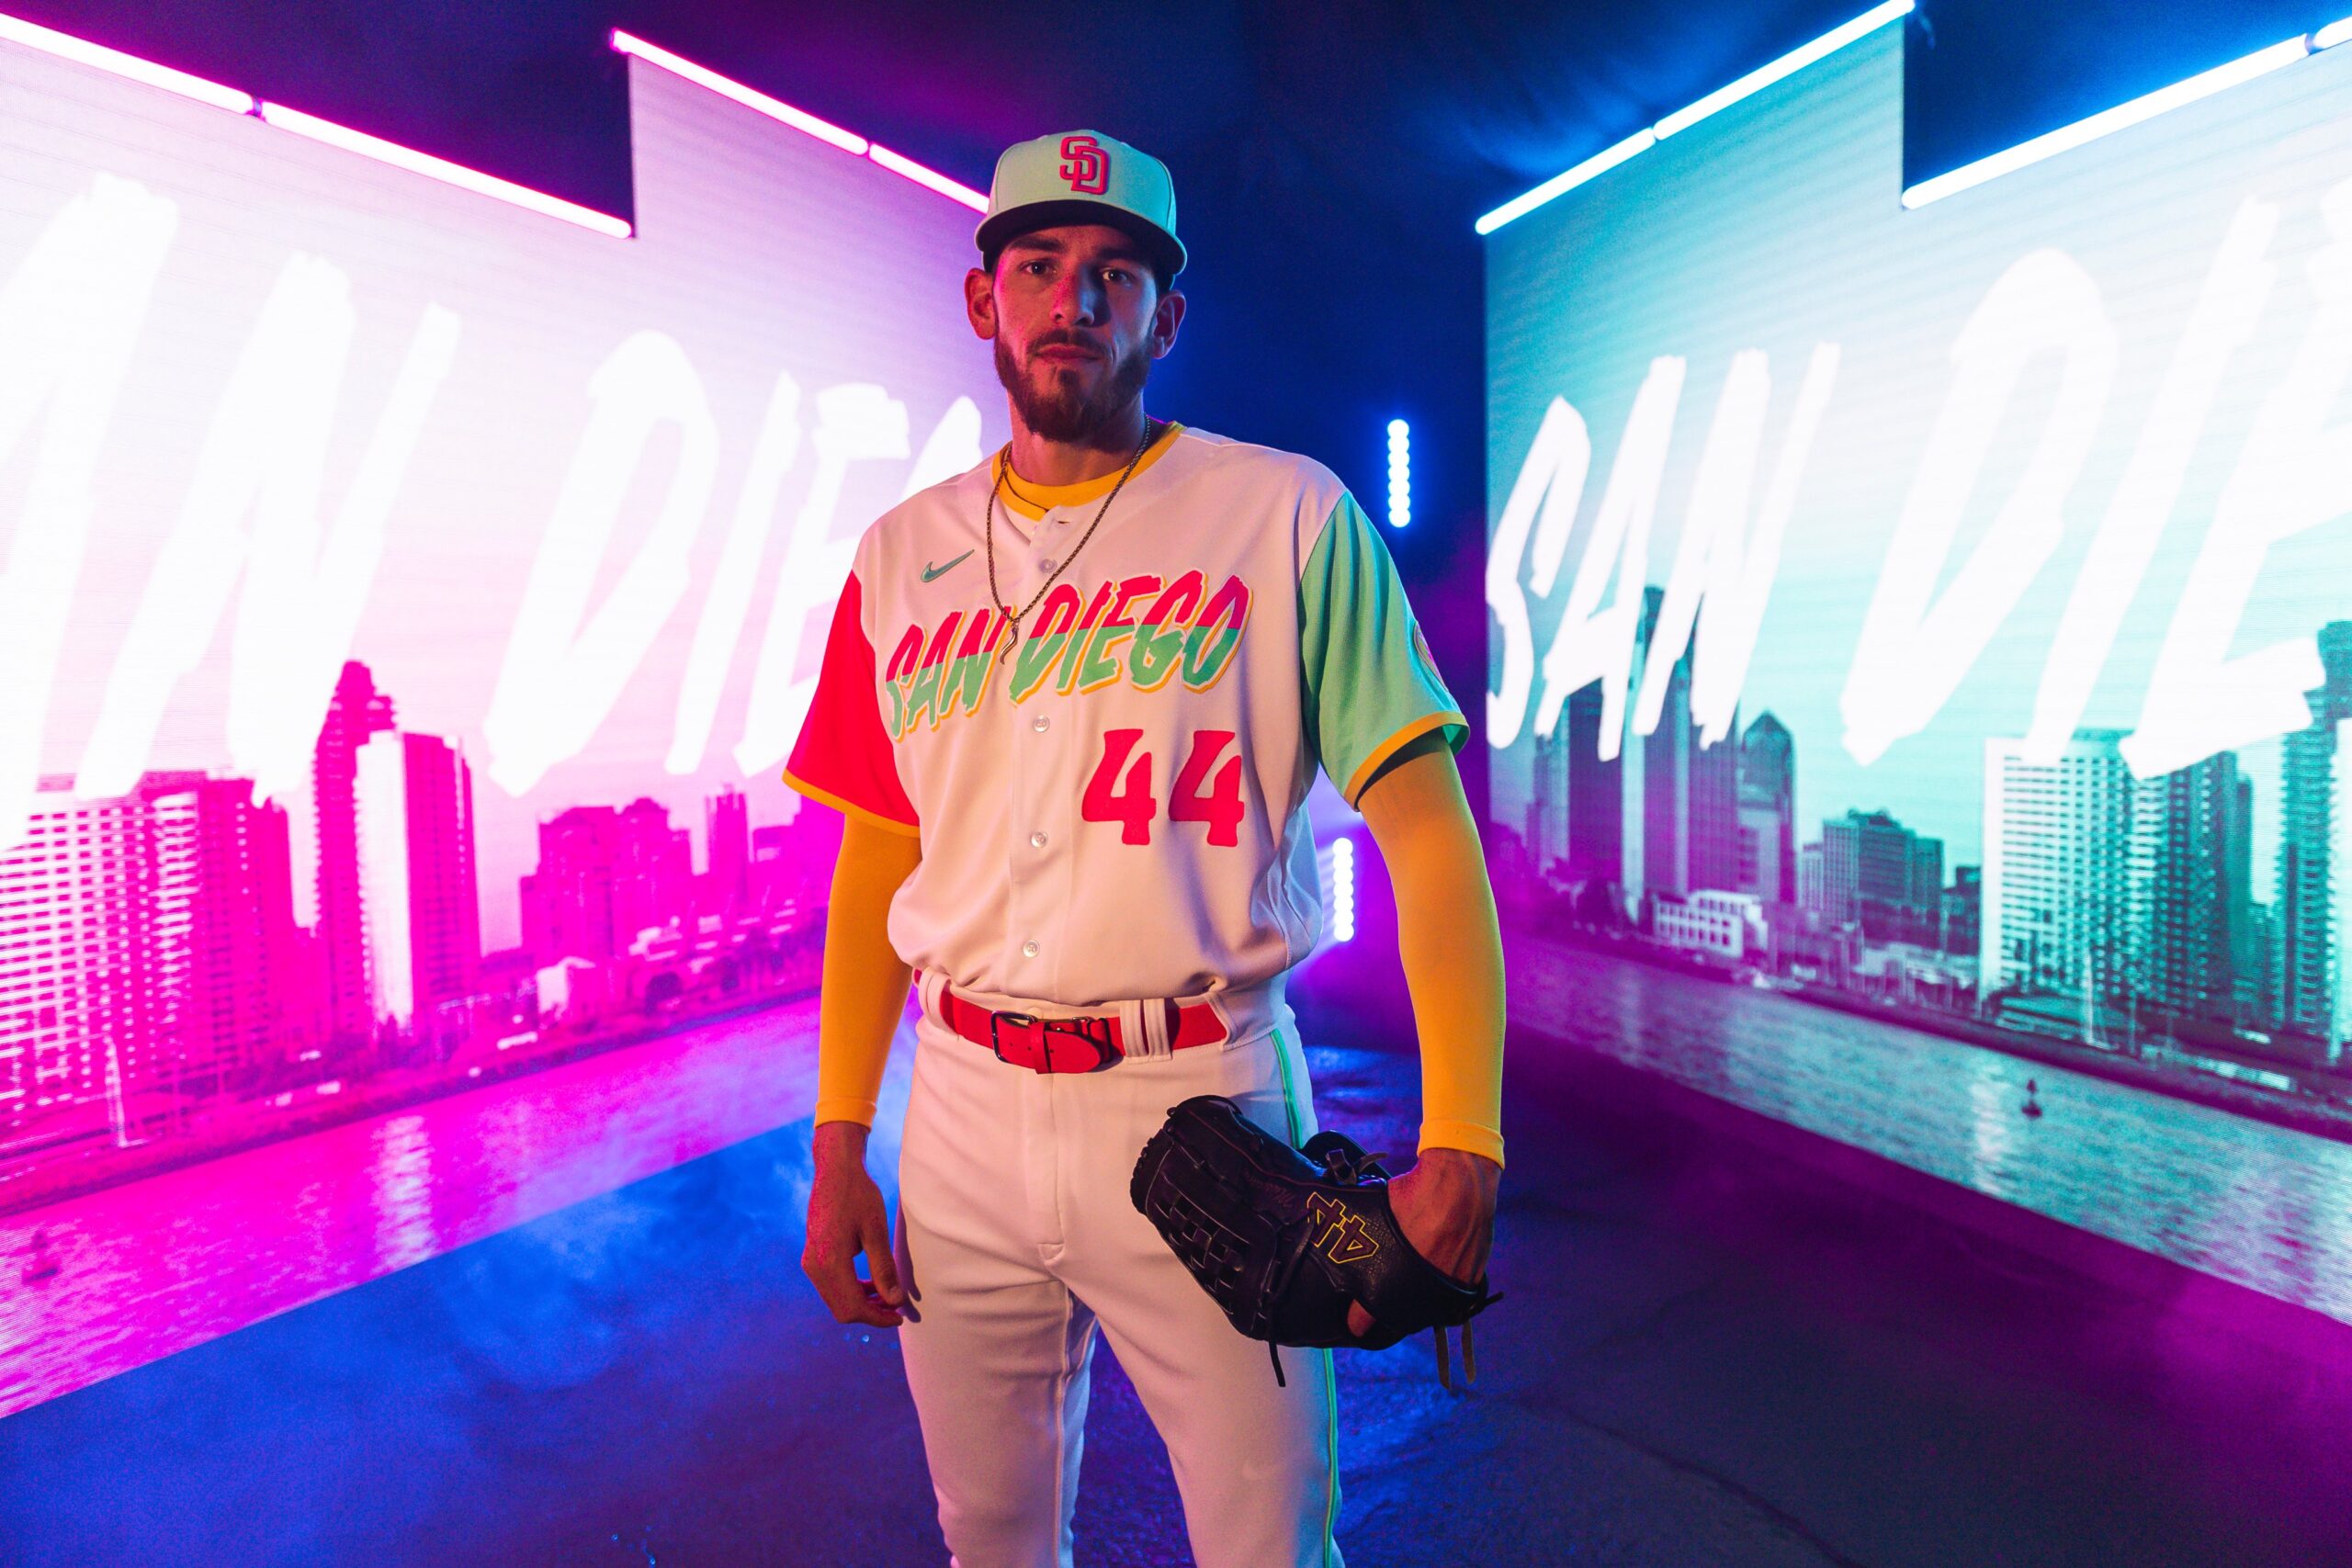 padres city connect unis